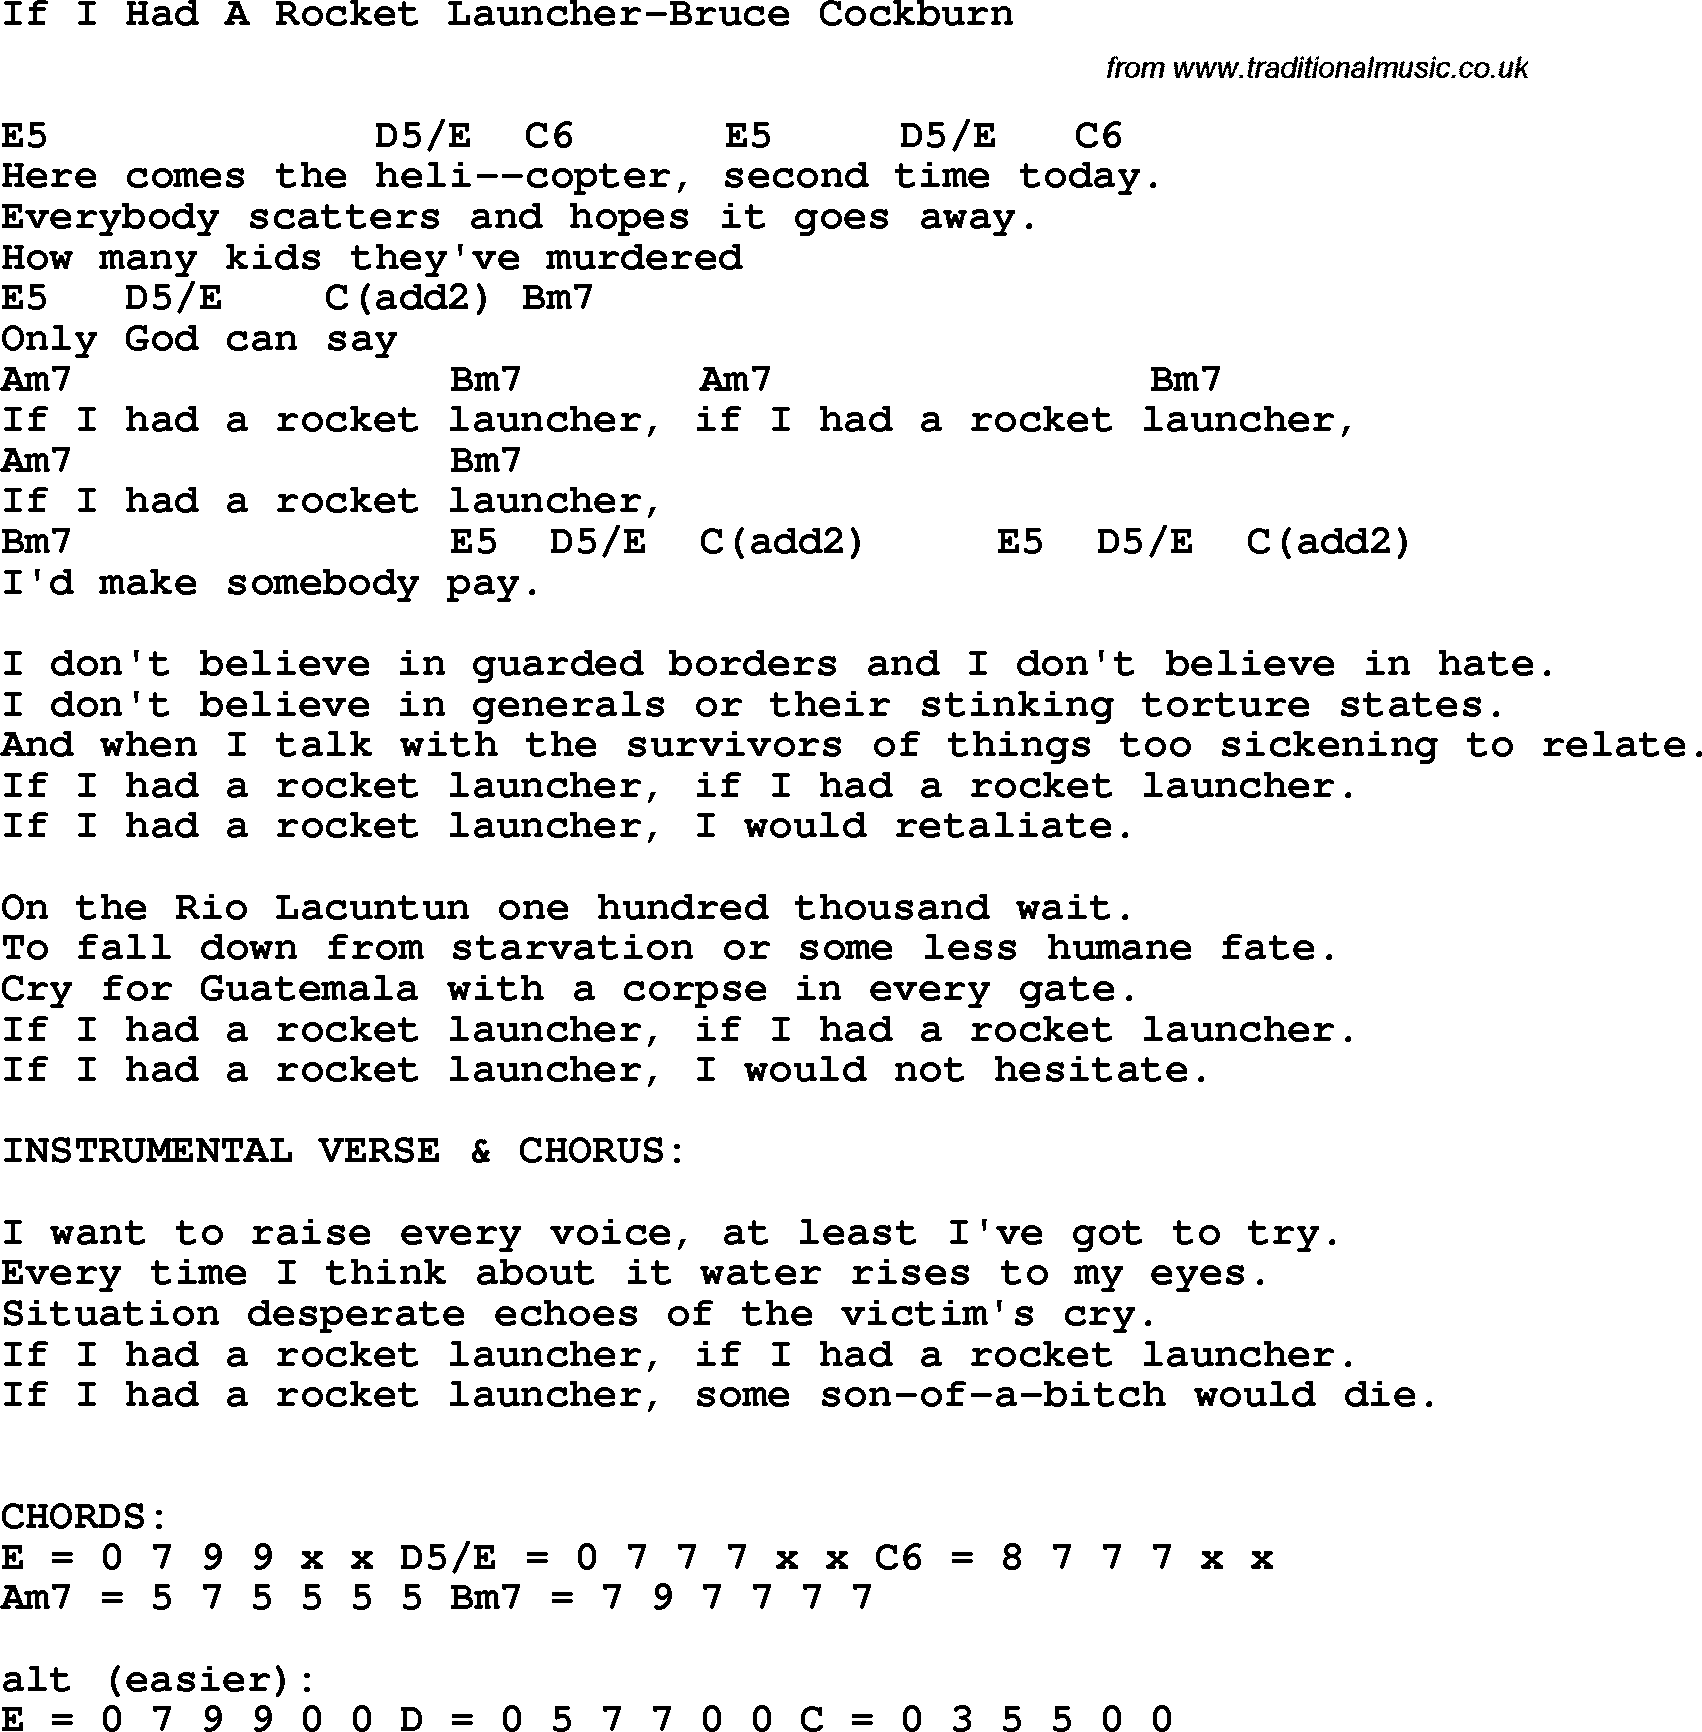 Protest Song If I Had A Rocket Launcher-Bruce Cockburn lyrics and chords